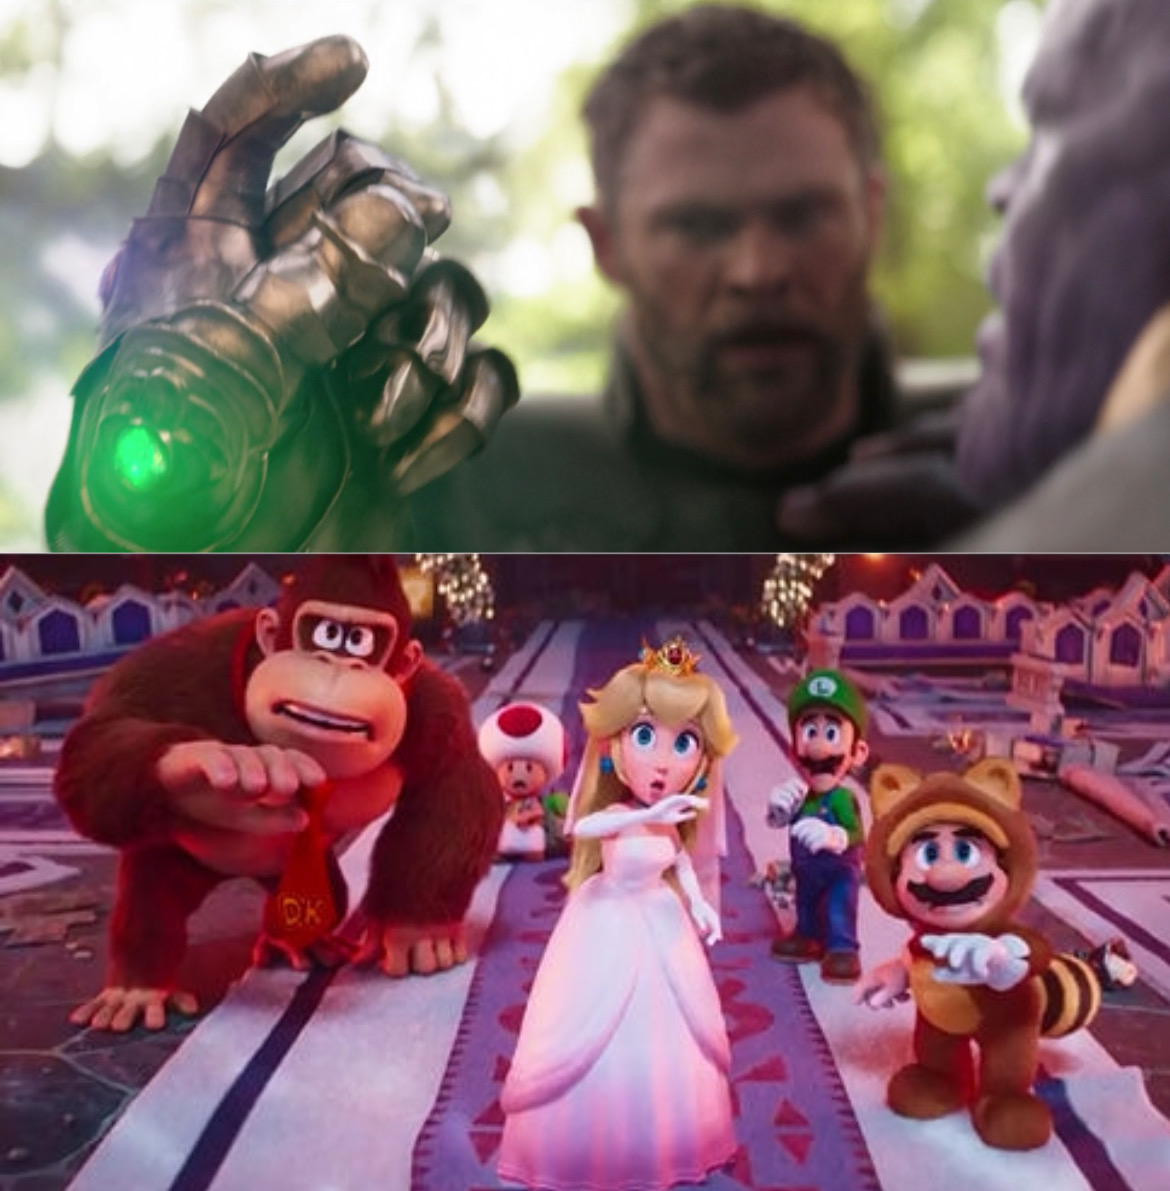 Tanooki Mario and Co. stunned at Thanos Snap by Disneyfan3000 on DeviantArt